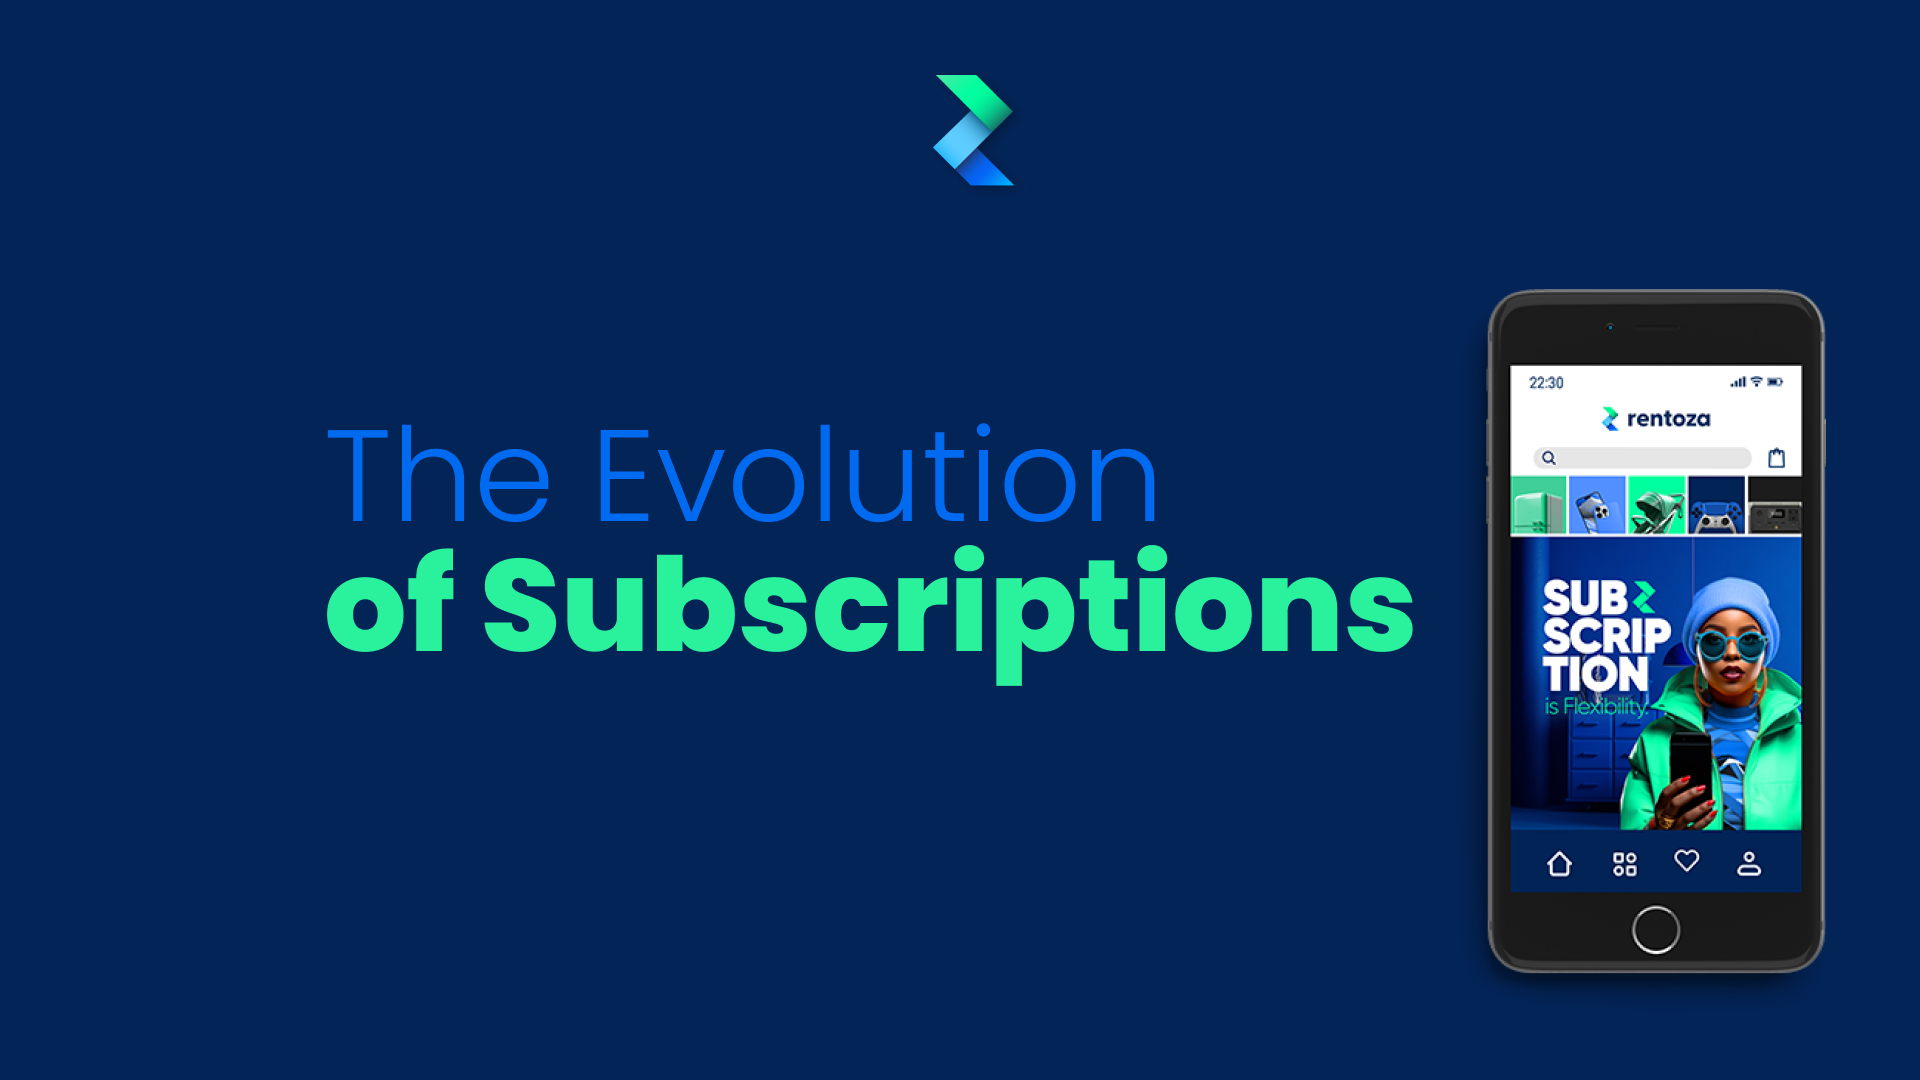 The Evolution of Subscriptions